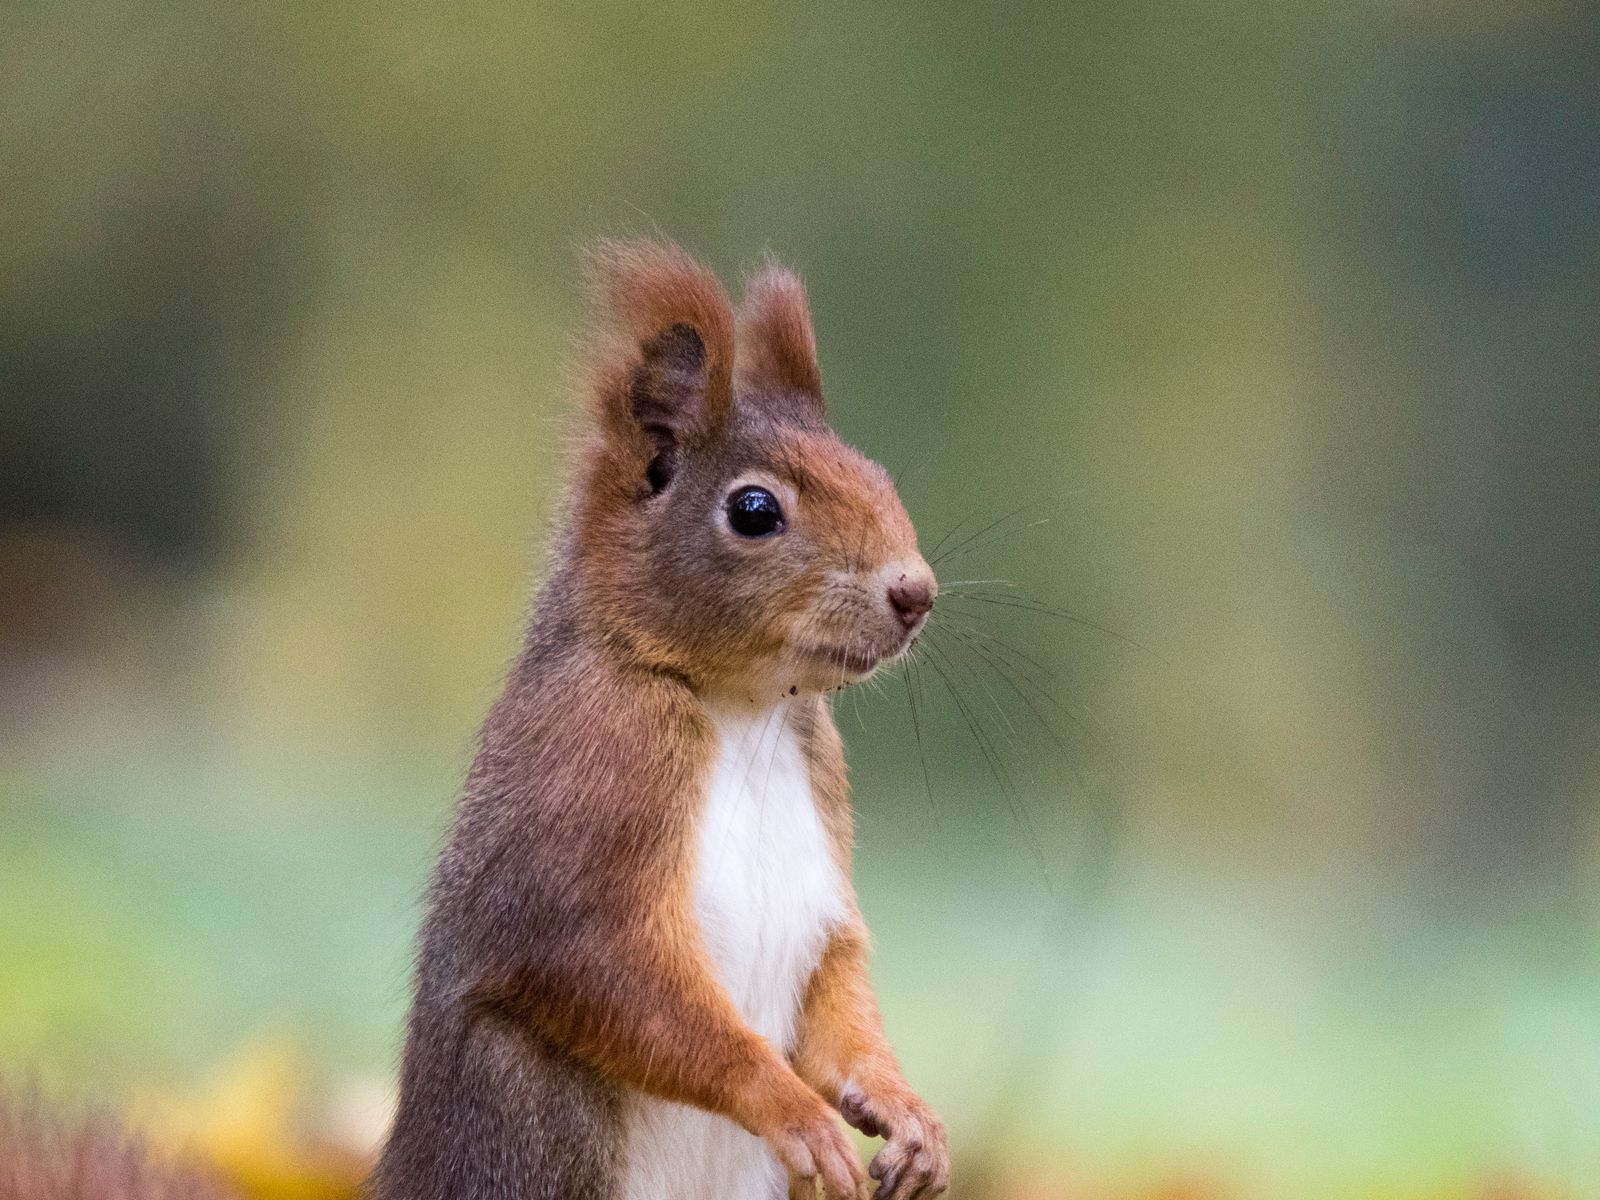 Download wallpaper 1600x1200 squirrel, cute, funny, animal, leaves standard  4:3 hd background